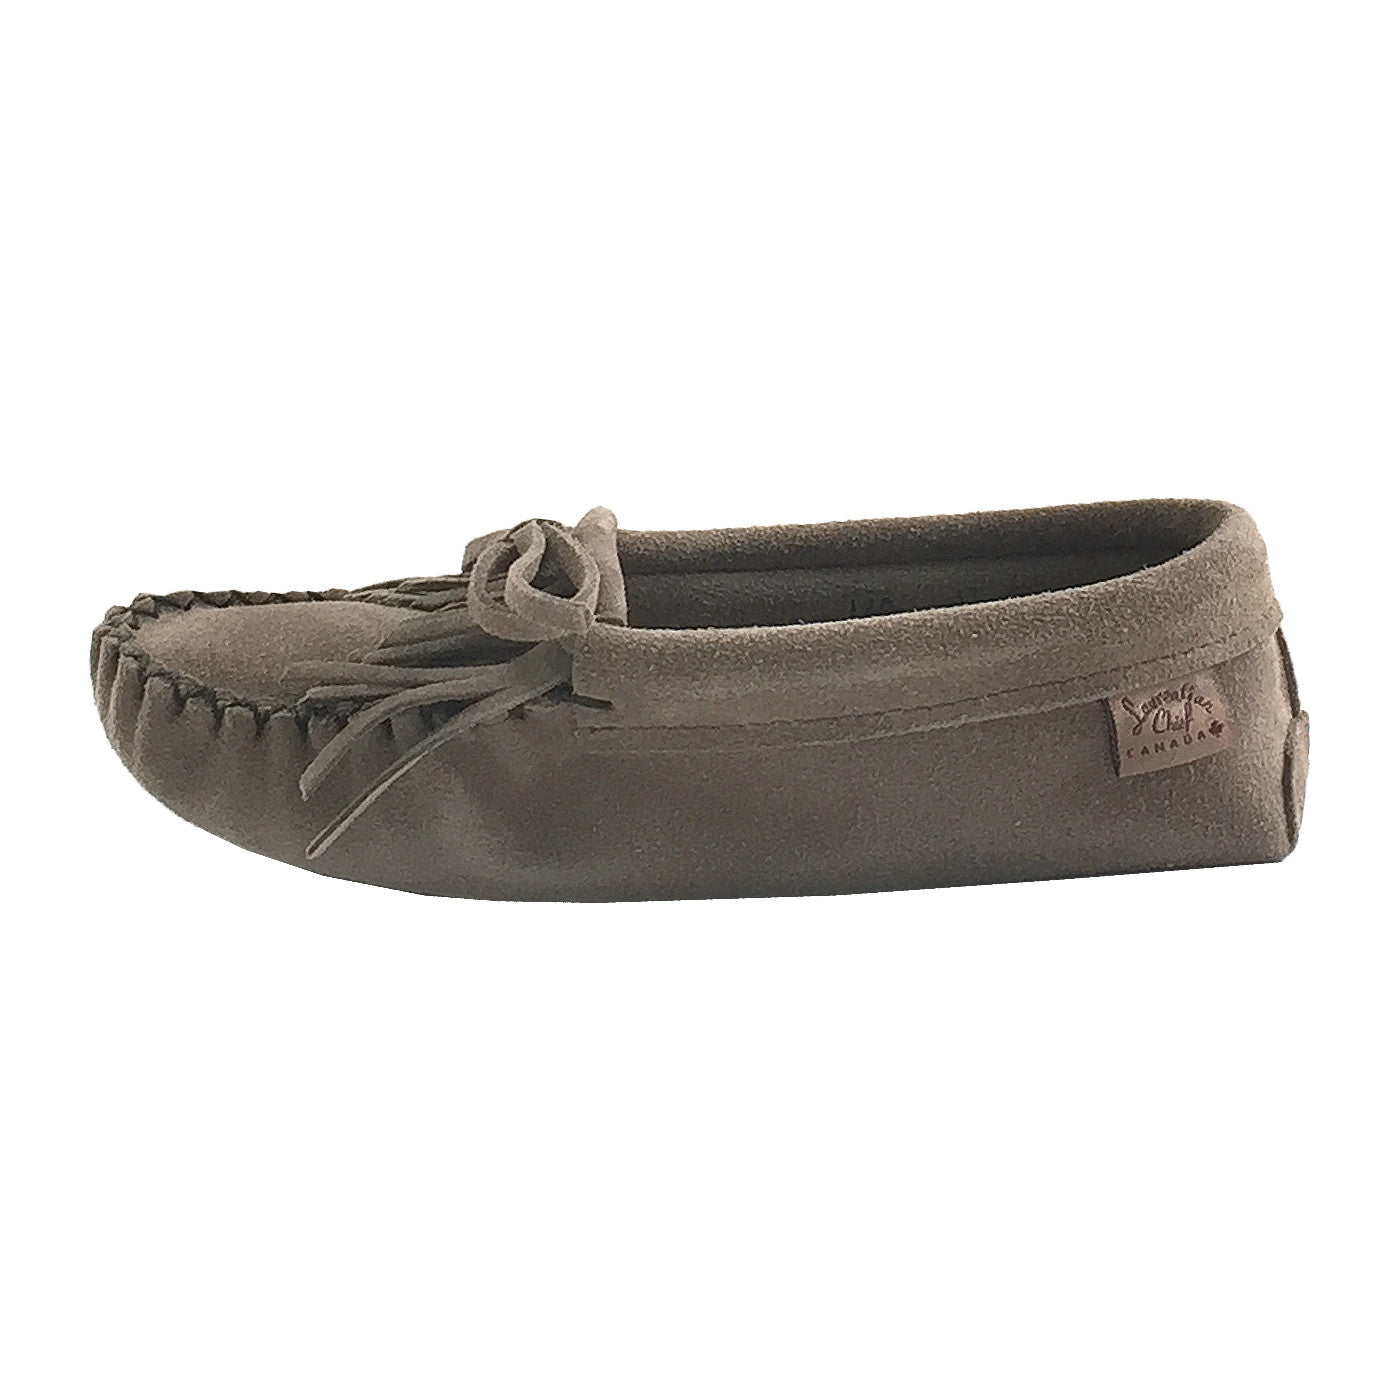 women's soft sole leather moccasins